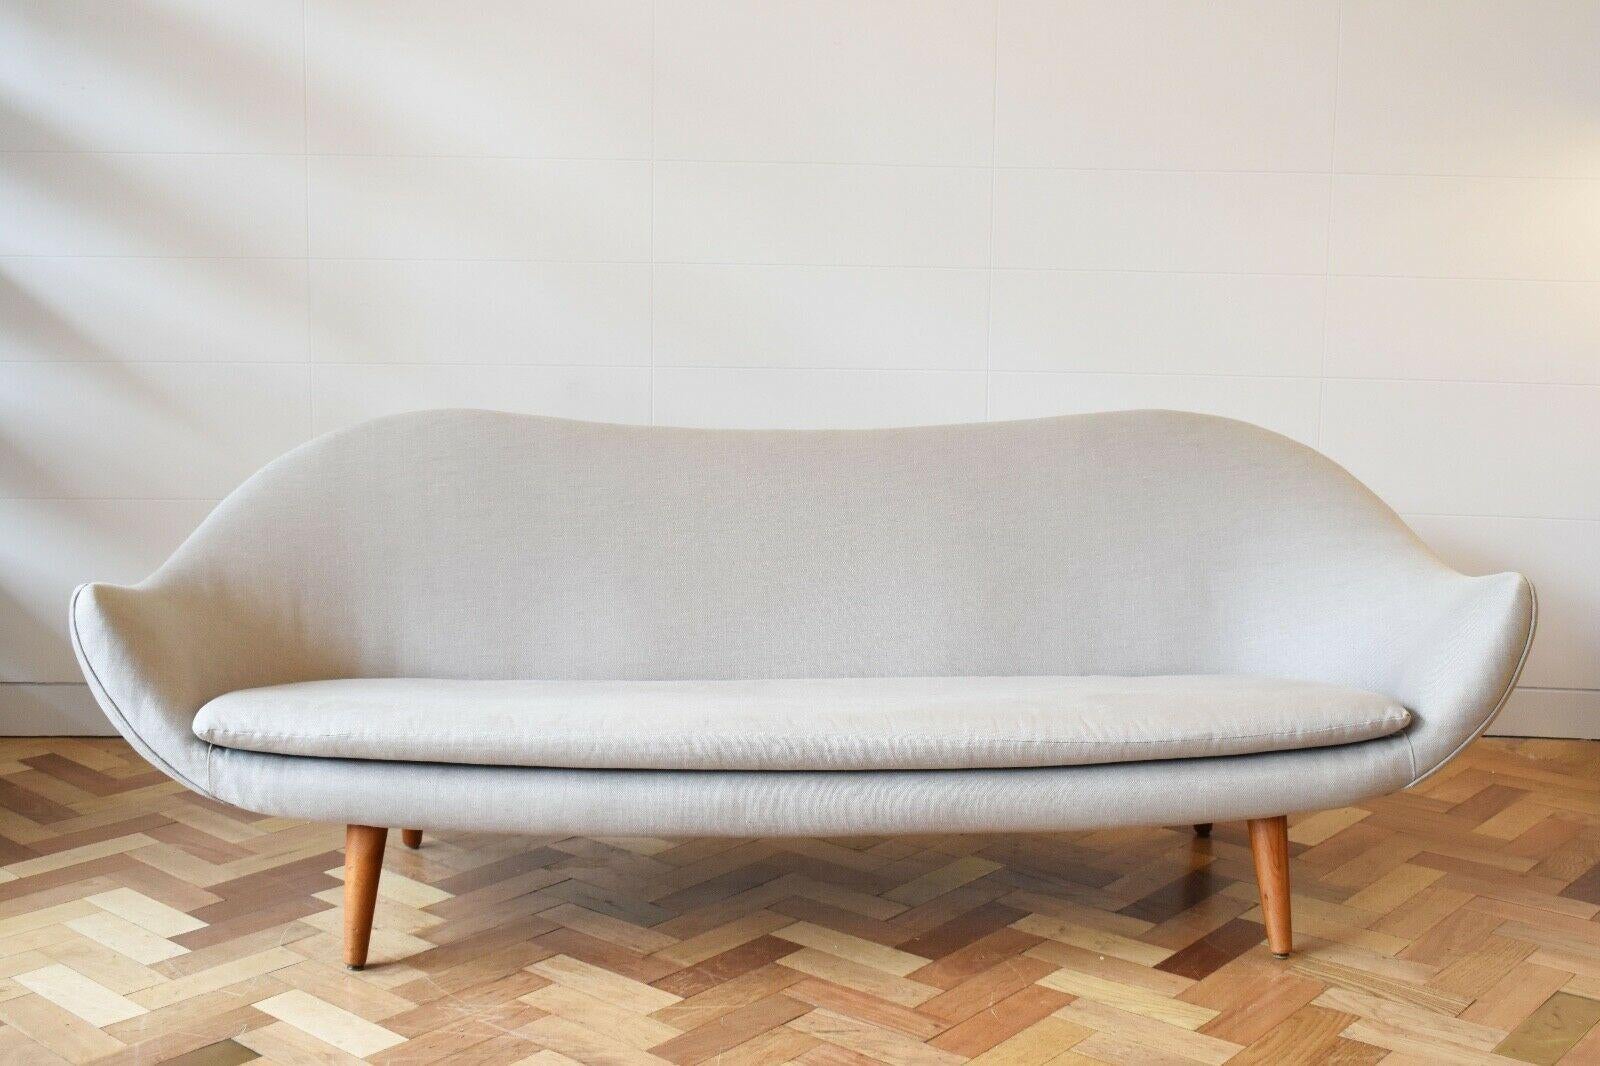 A rare model 860 sofa designed by Fredrik Kayser for Vatne Mobelfabrikk in Norway, 1960's.

This sofa has a beautiful sculptural shape and sleek lines, Teak legs and a light blue/grey upholstery. 
About the designer: 
Norwegian industrial